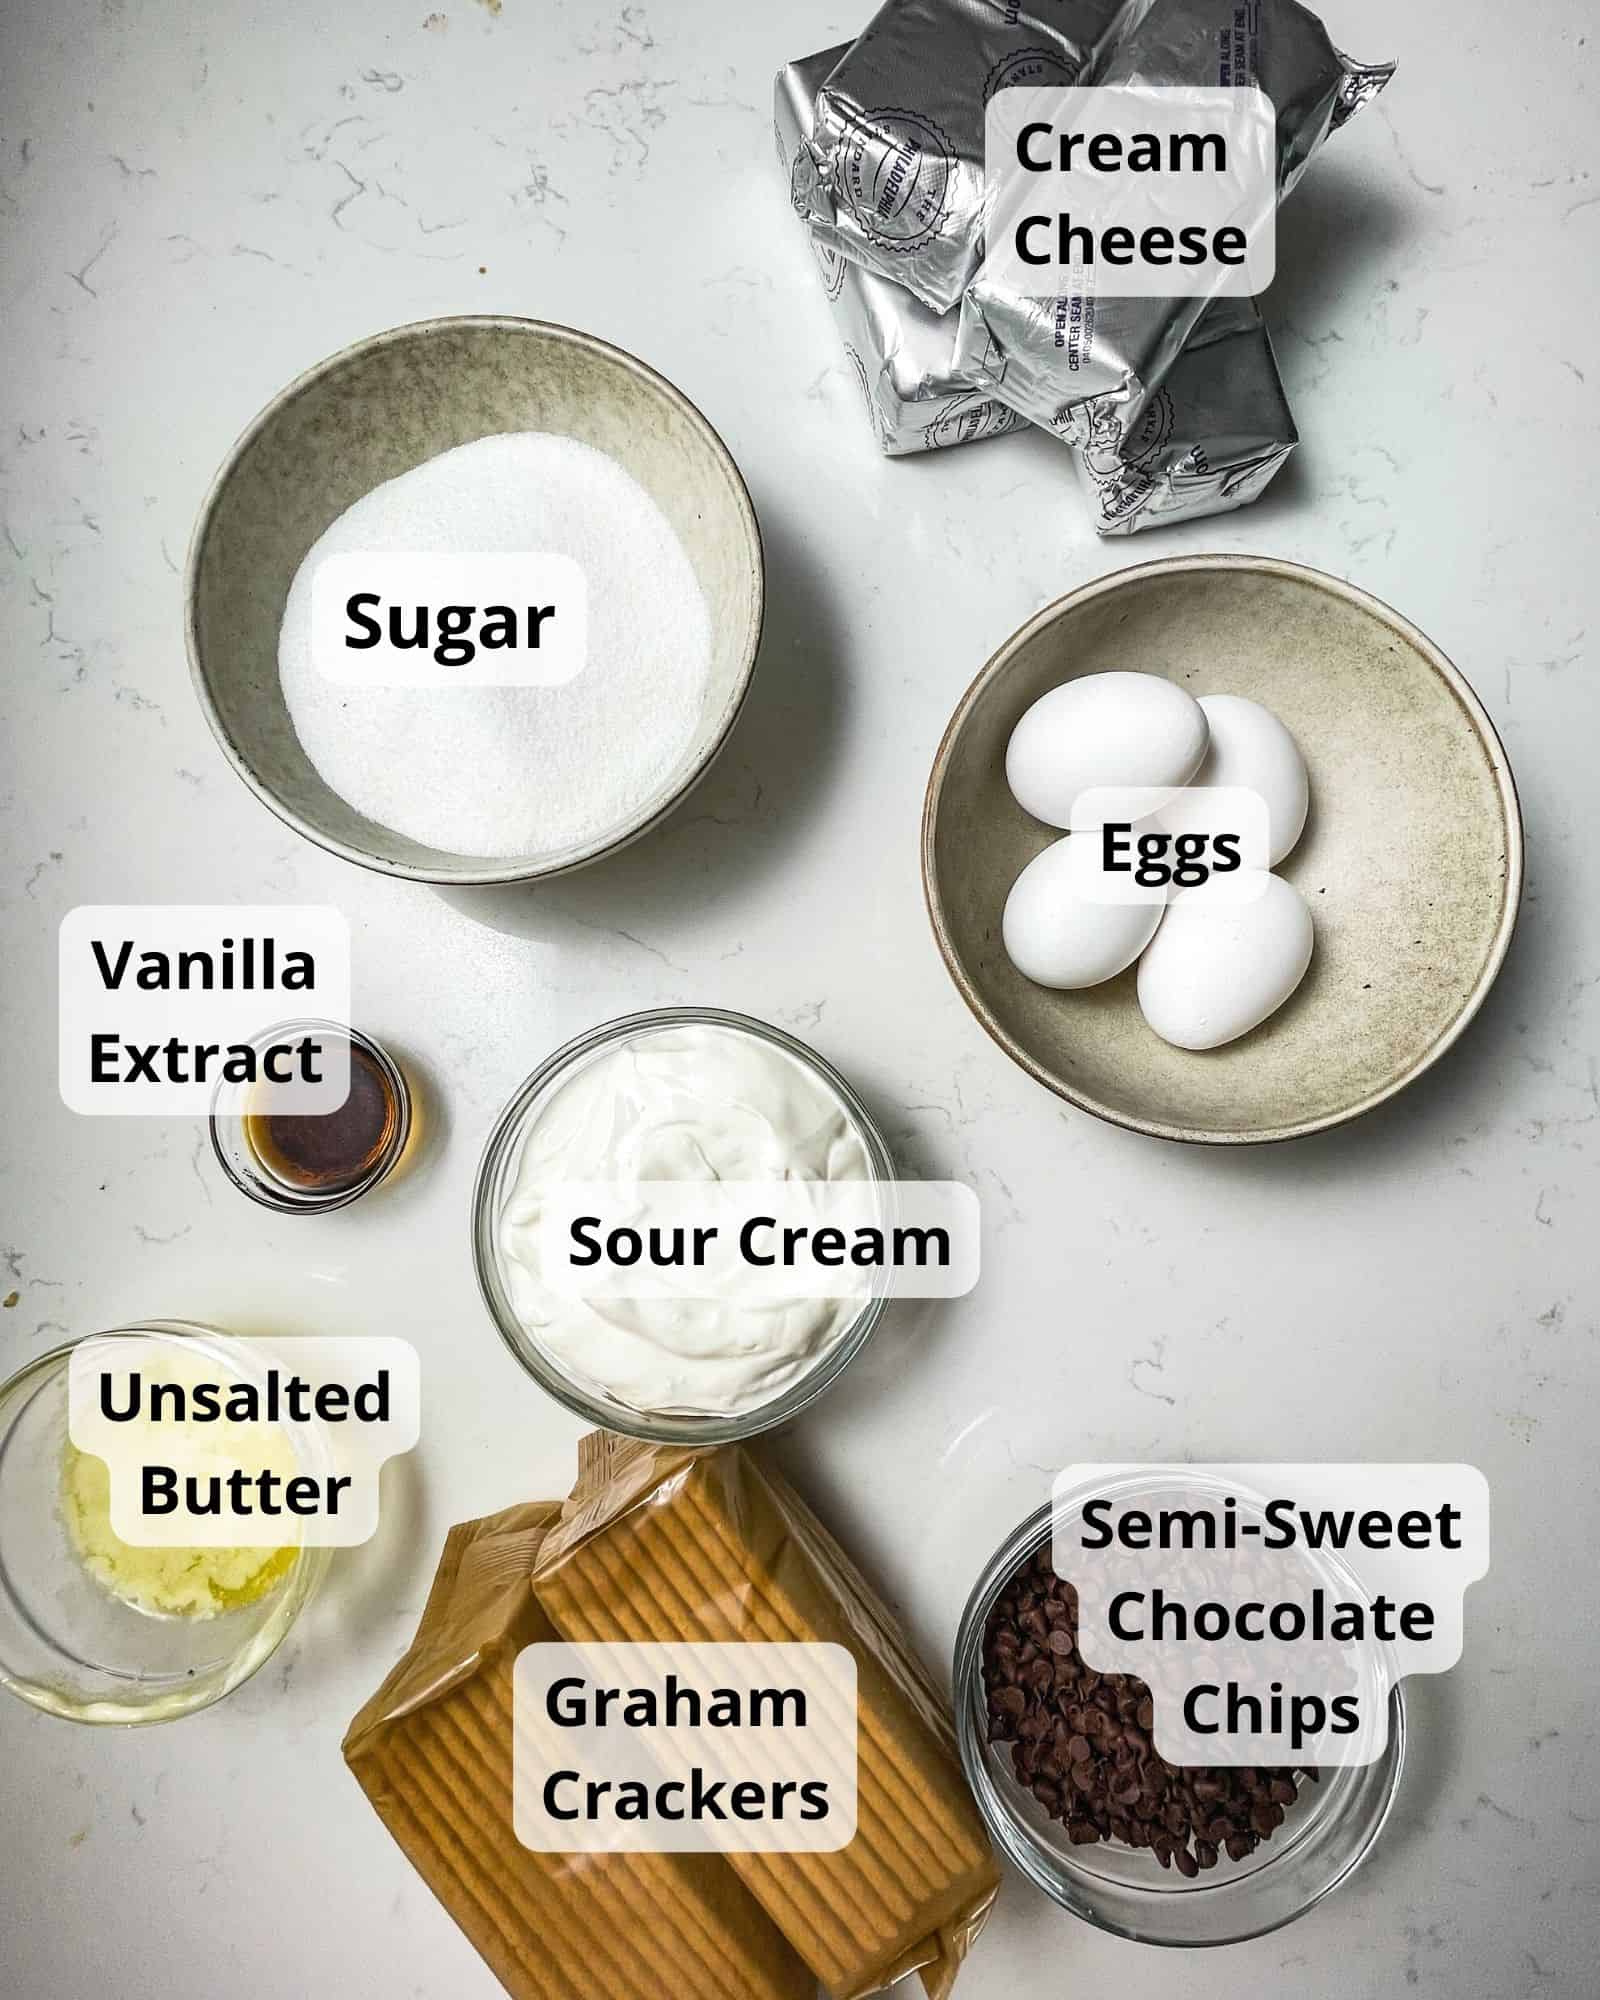 ingredients to make chocolate chip cheesecake - cream cheese, sugar, eggs, vanilla extract, sour cream, melted butter, graham crackers, chocolate chips, and heavy cream.